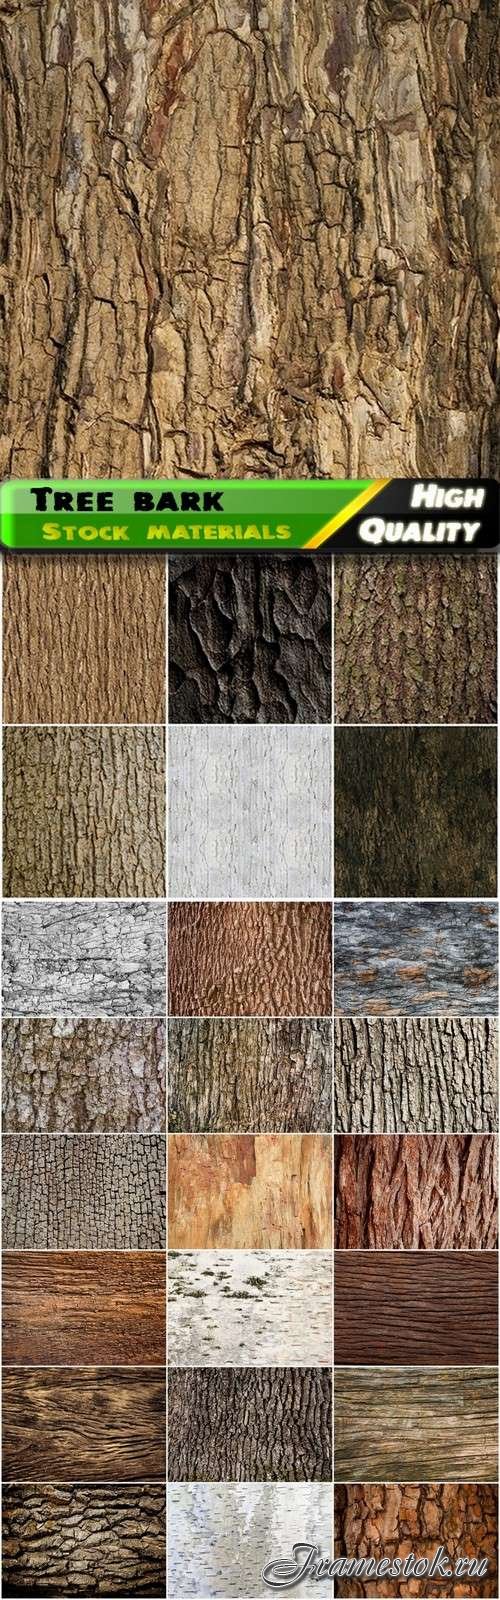 Textures of tree bark and wood - 25 HQ Jpg